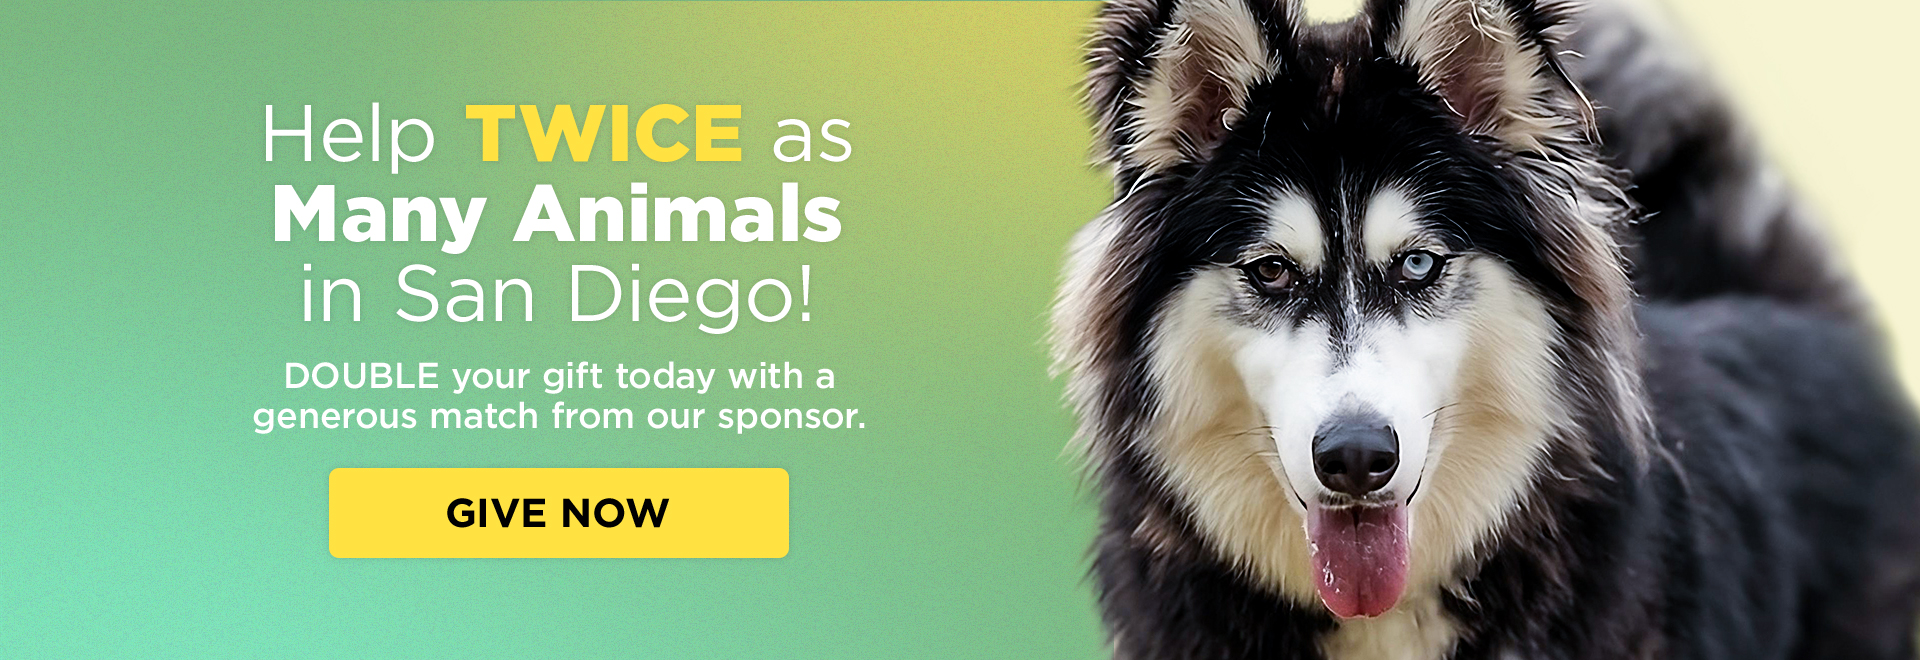 Help twice as many animals in San Diego! Double your gift today with a generous match from our sponsor. Give Now